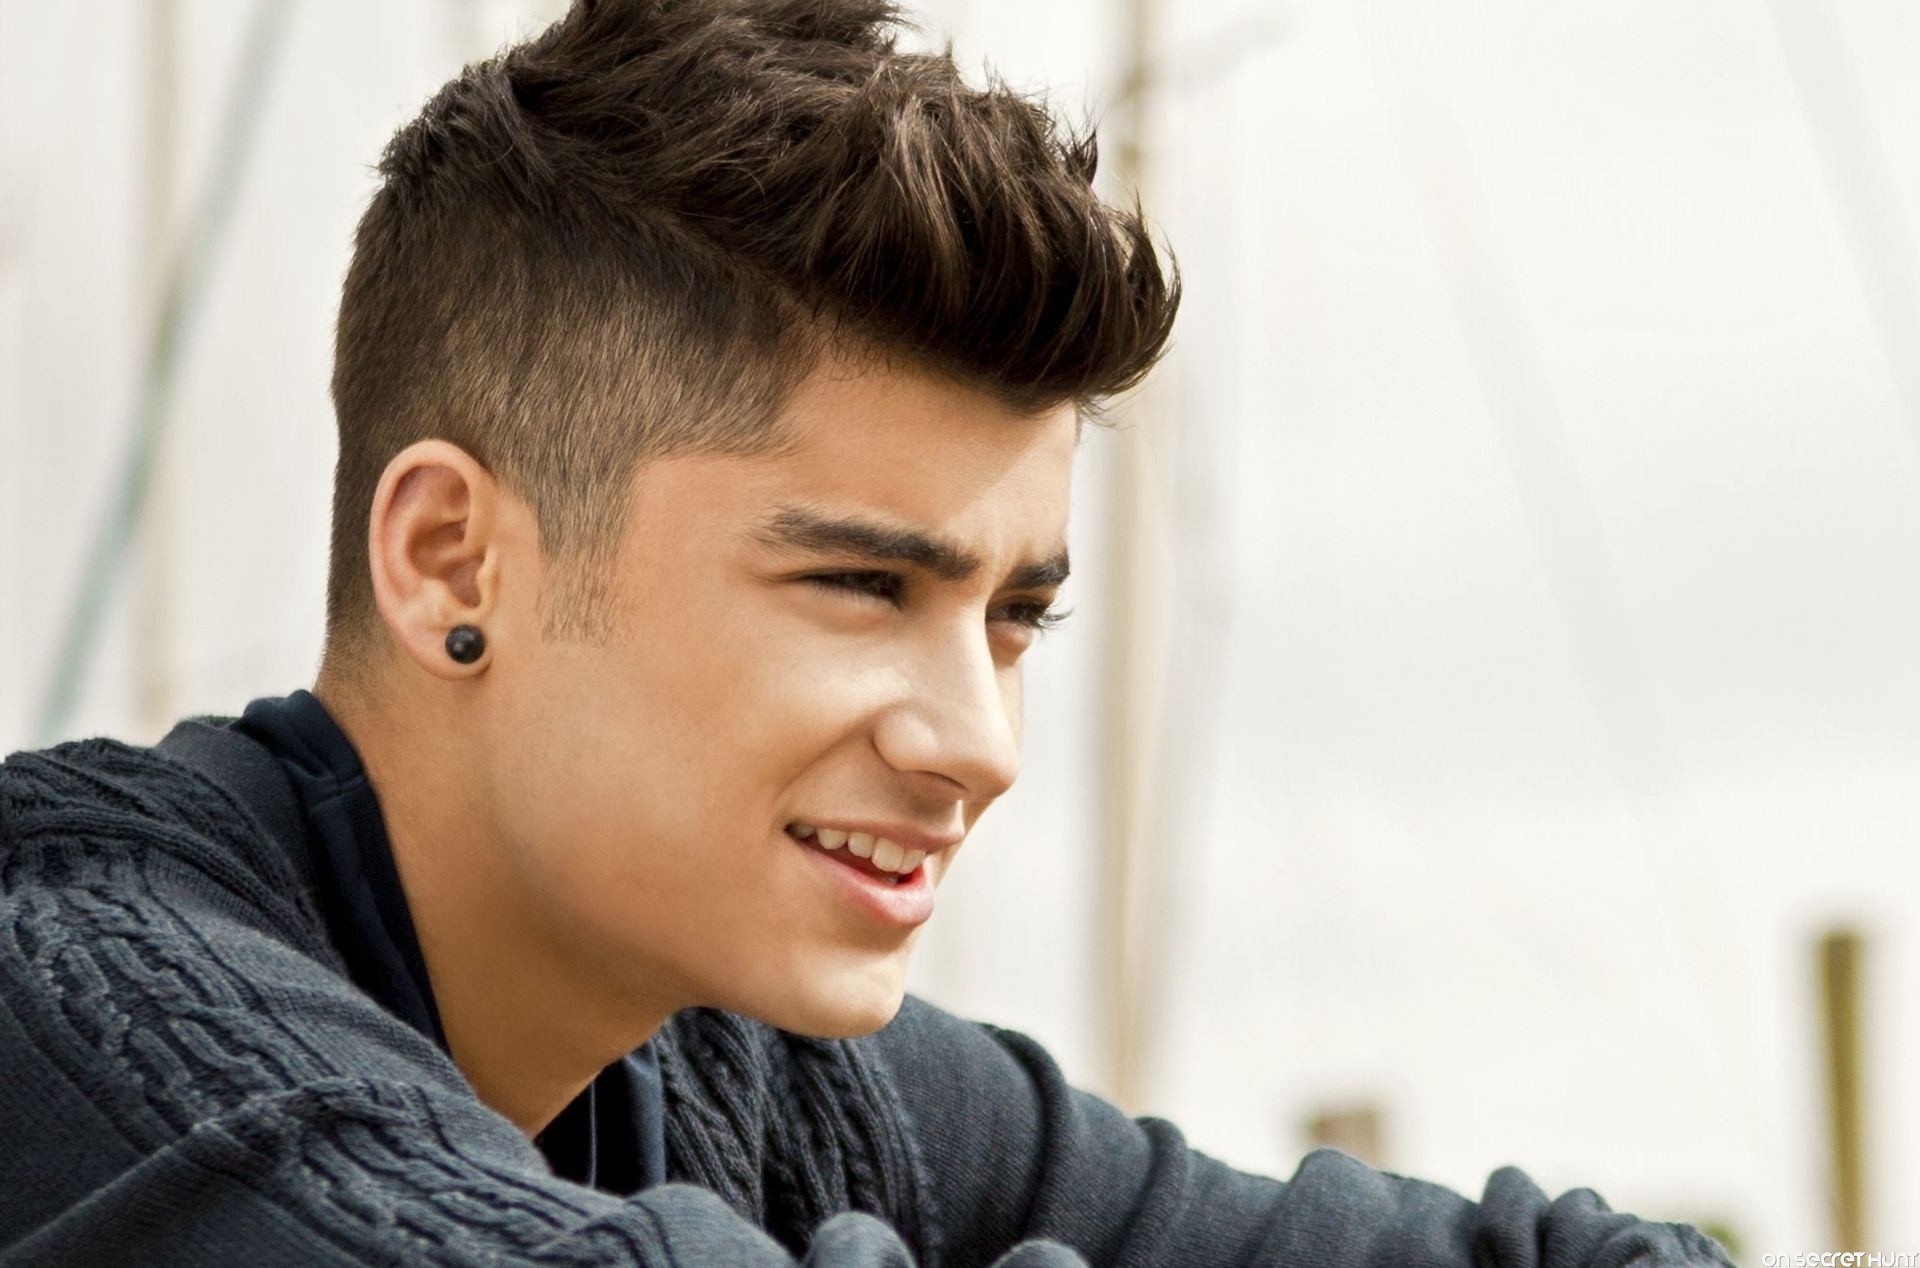 From One Direction to ISIS: The Zayn Malik Story - The Michigan Review